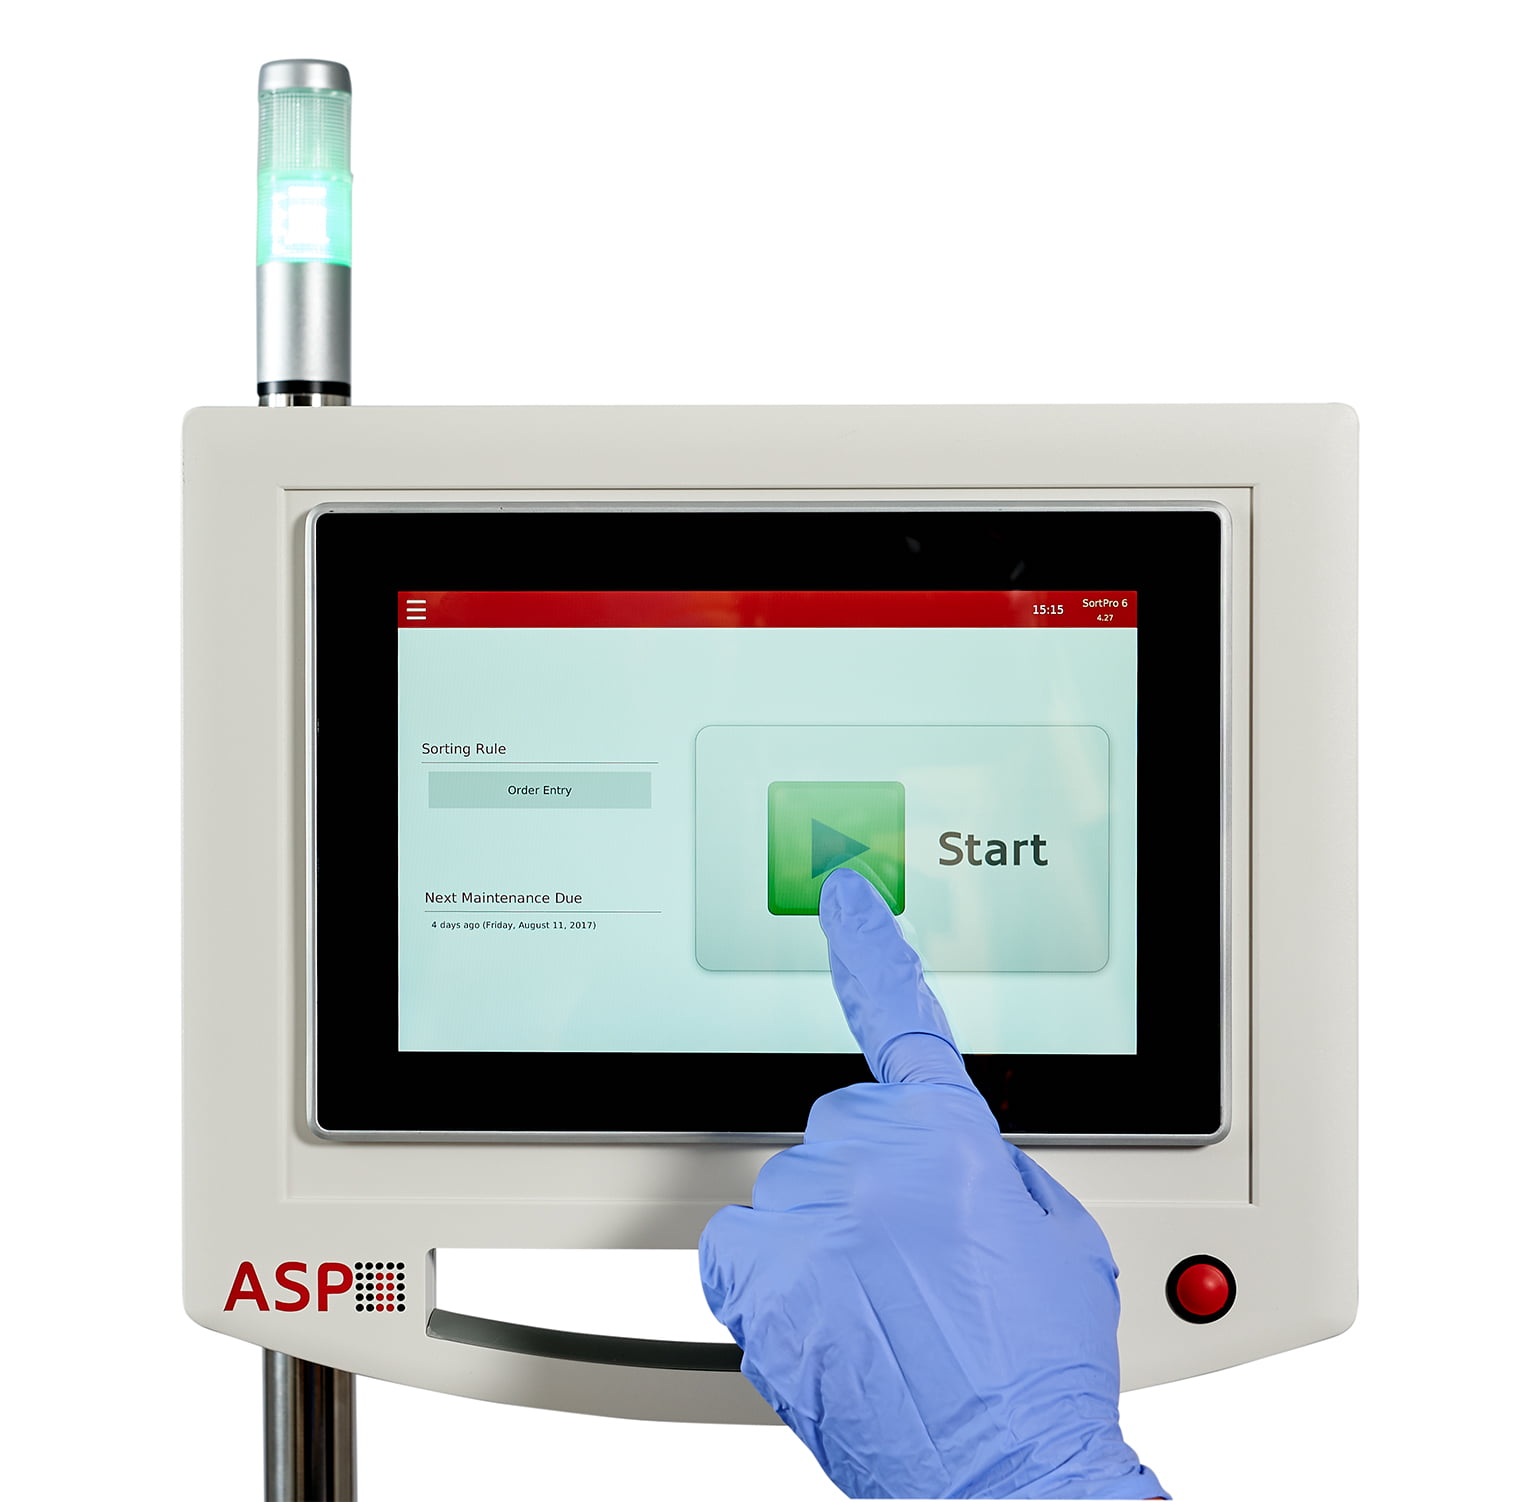 Picture shows a hand with blue medical gloves touching the start button on the digital screen of ASP SortPro Tubesorter